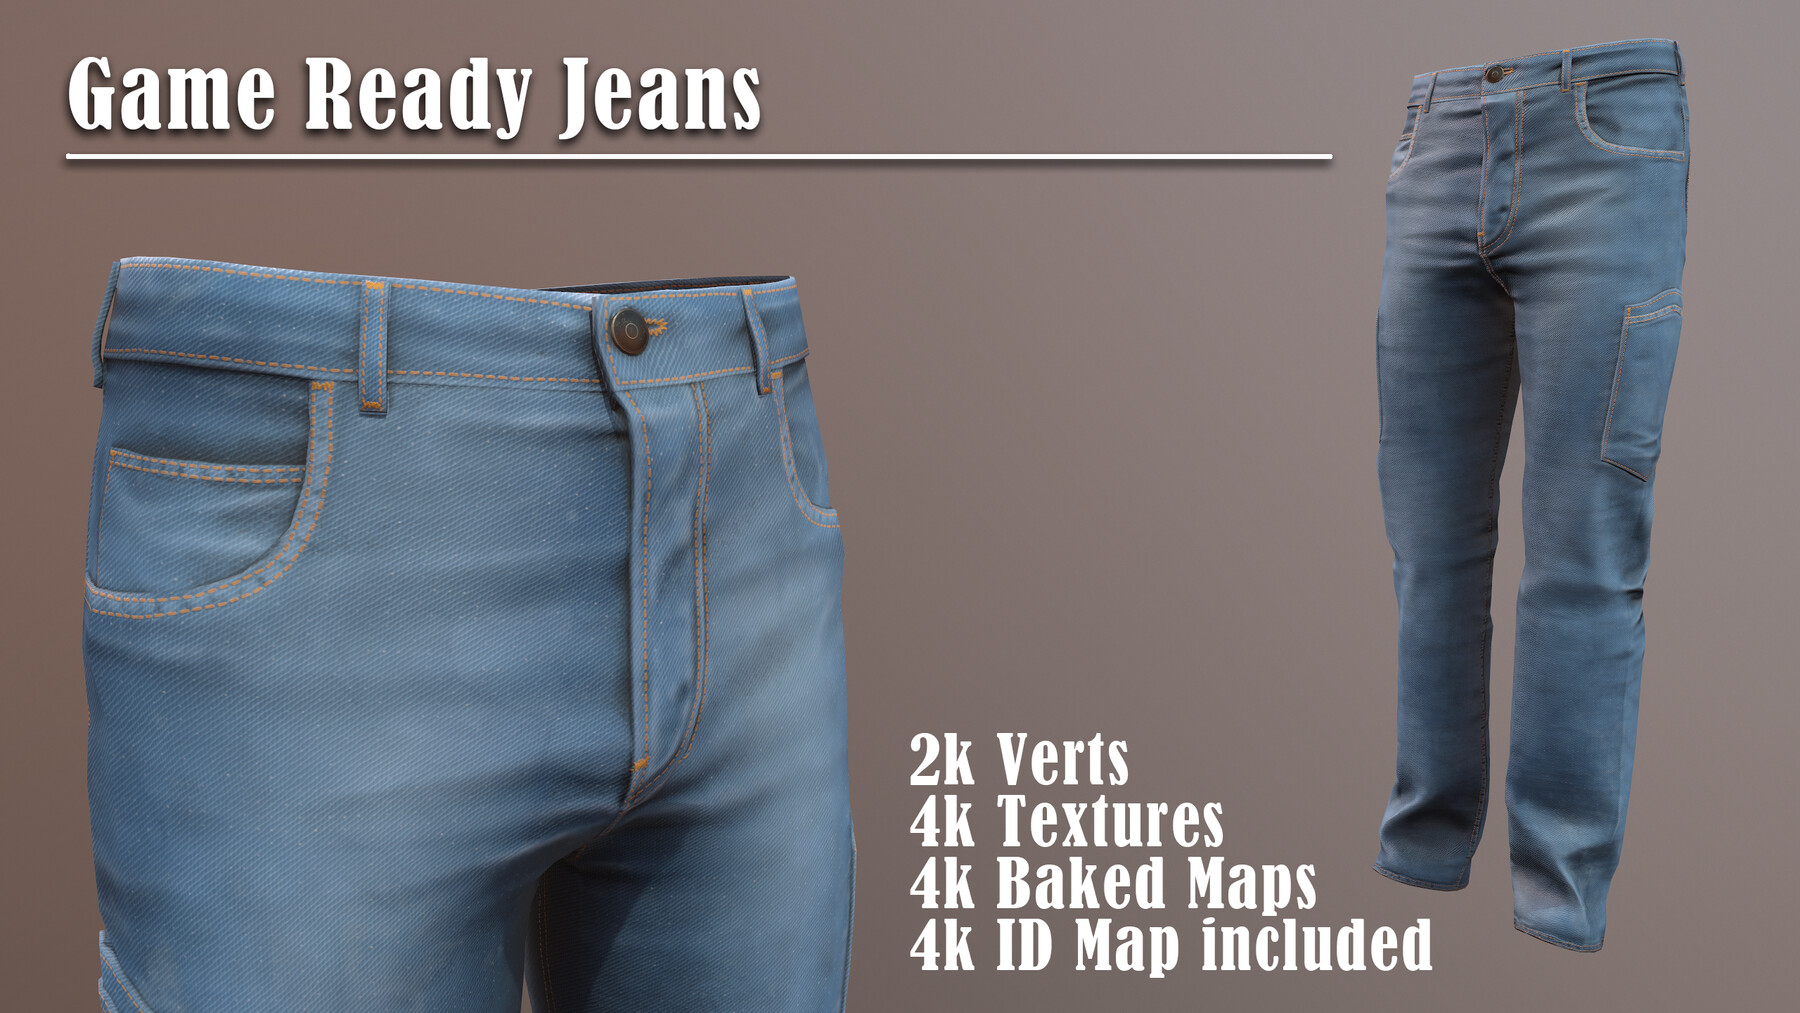 ArtStation - Jeans - Game-Ready | Game Assets